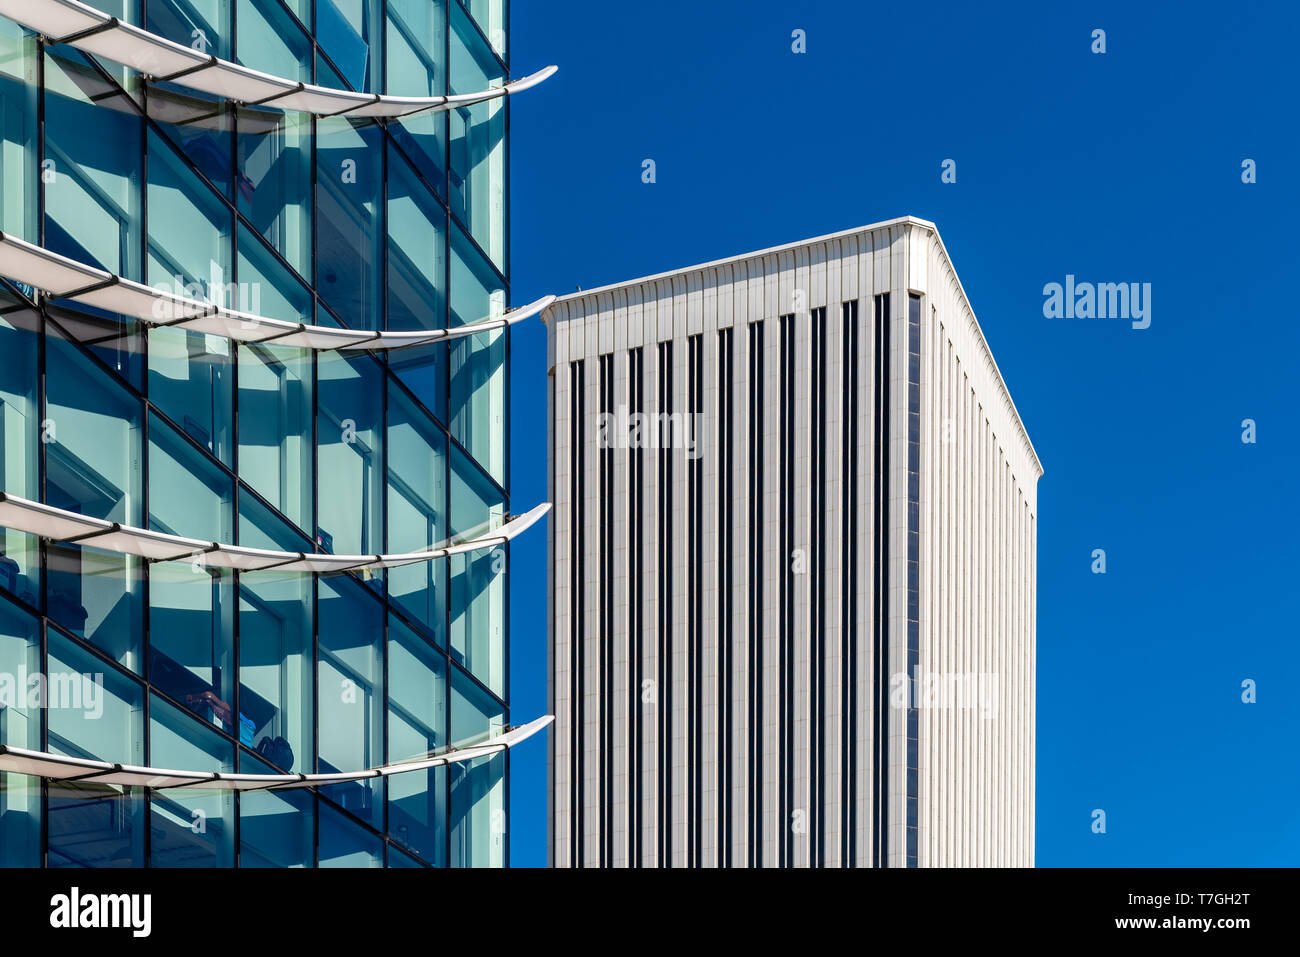 Madrid, Spain - May 1, 2019: Low angle view of Modern skyscrapers in AZCA Financial District against blue sky. Stock Photo